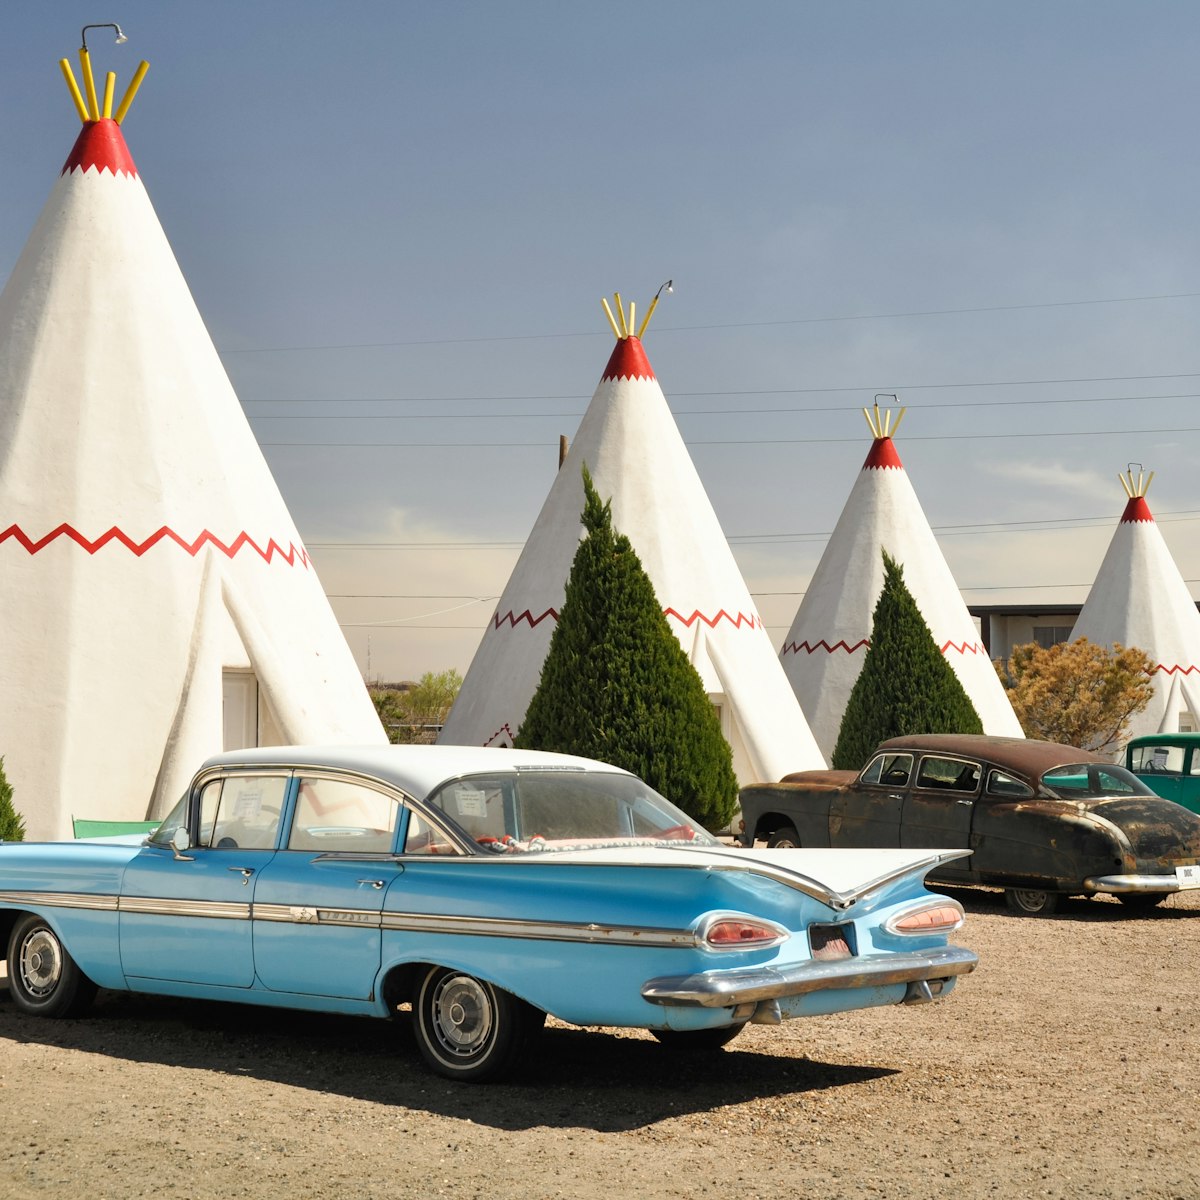 May 4, 2011: Wigwam Motel on Route 66 in Holbrook. The rooms of this hotel are built in the form of tipis.